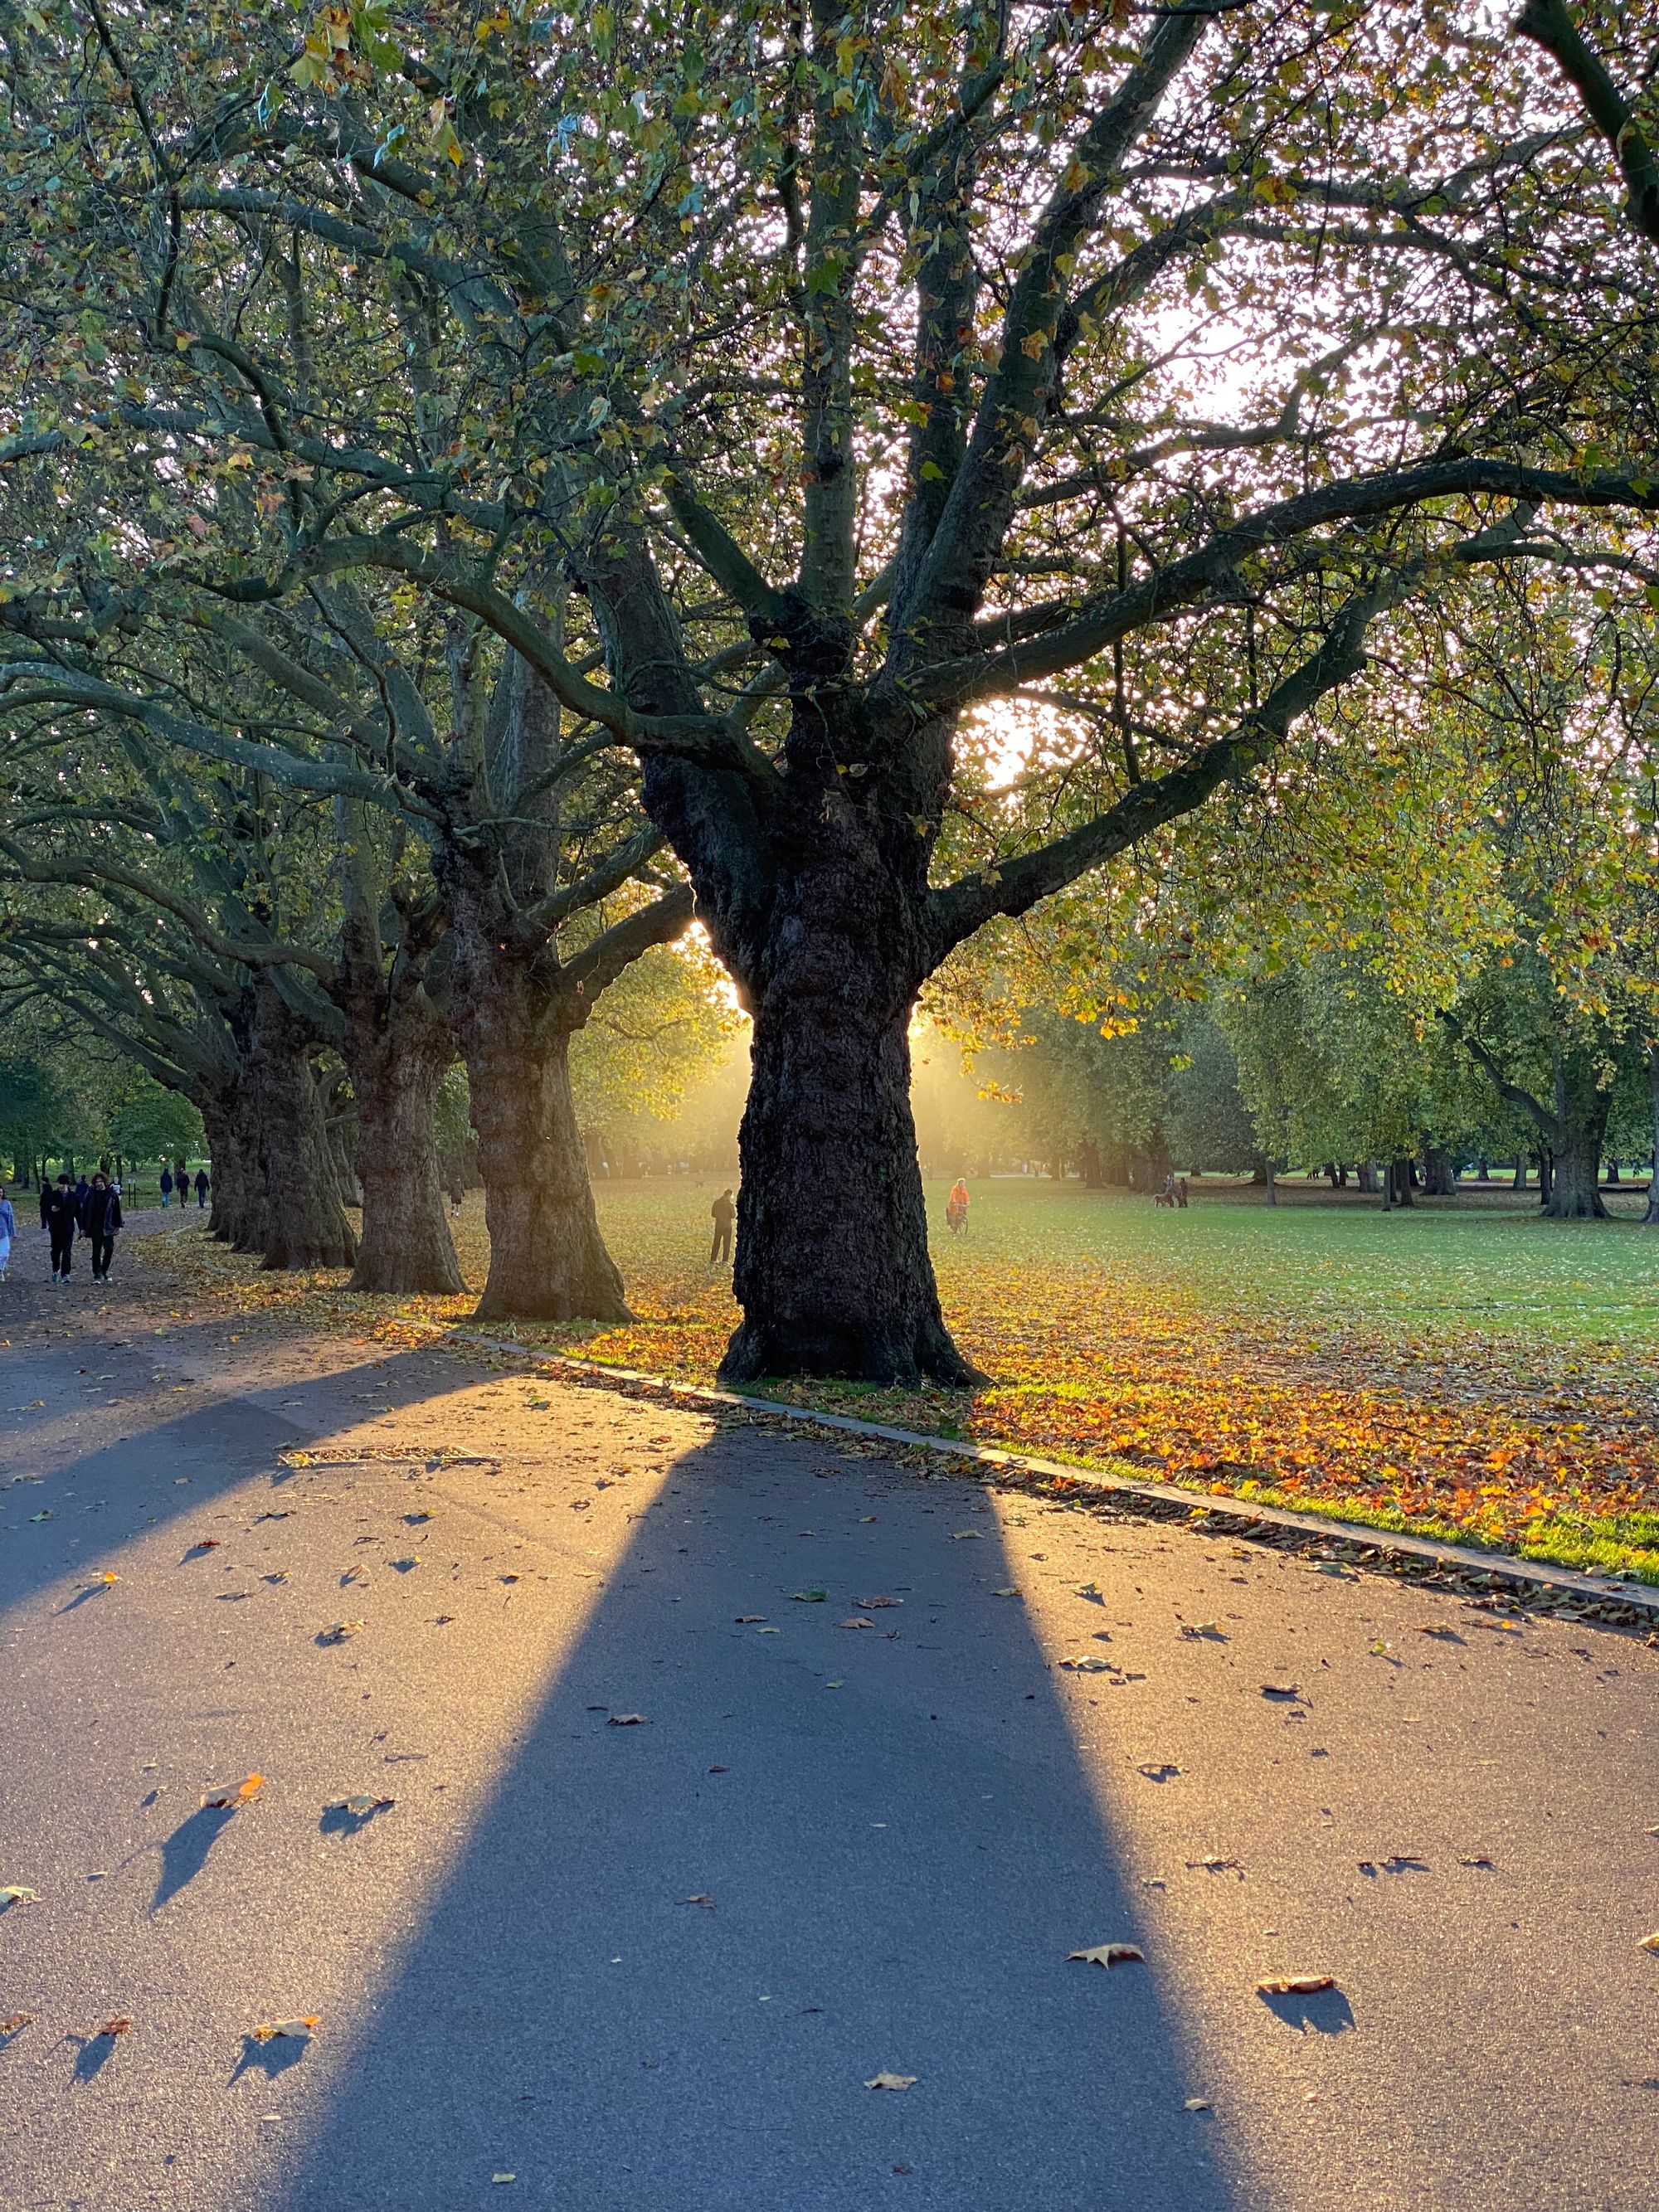 A tree in Victoria Park with the sun setting behind it, sunrays emerging through the shadows.